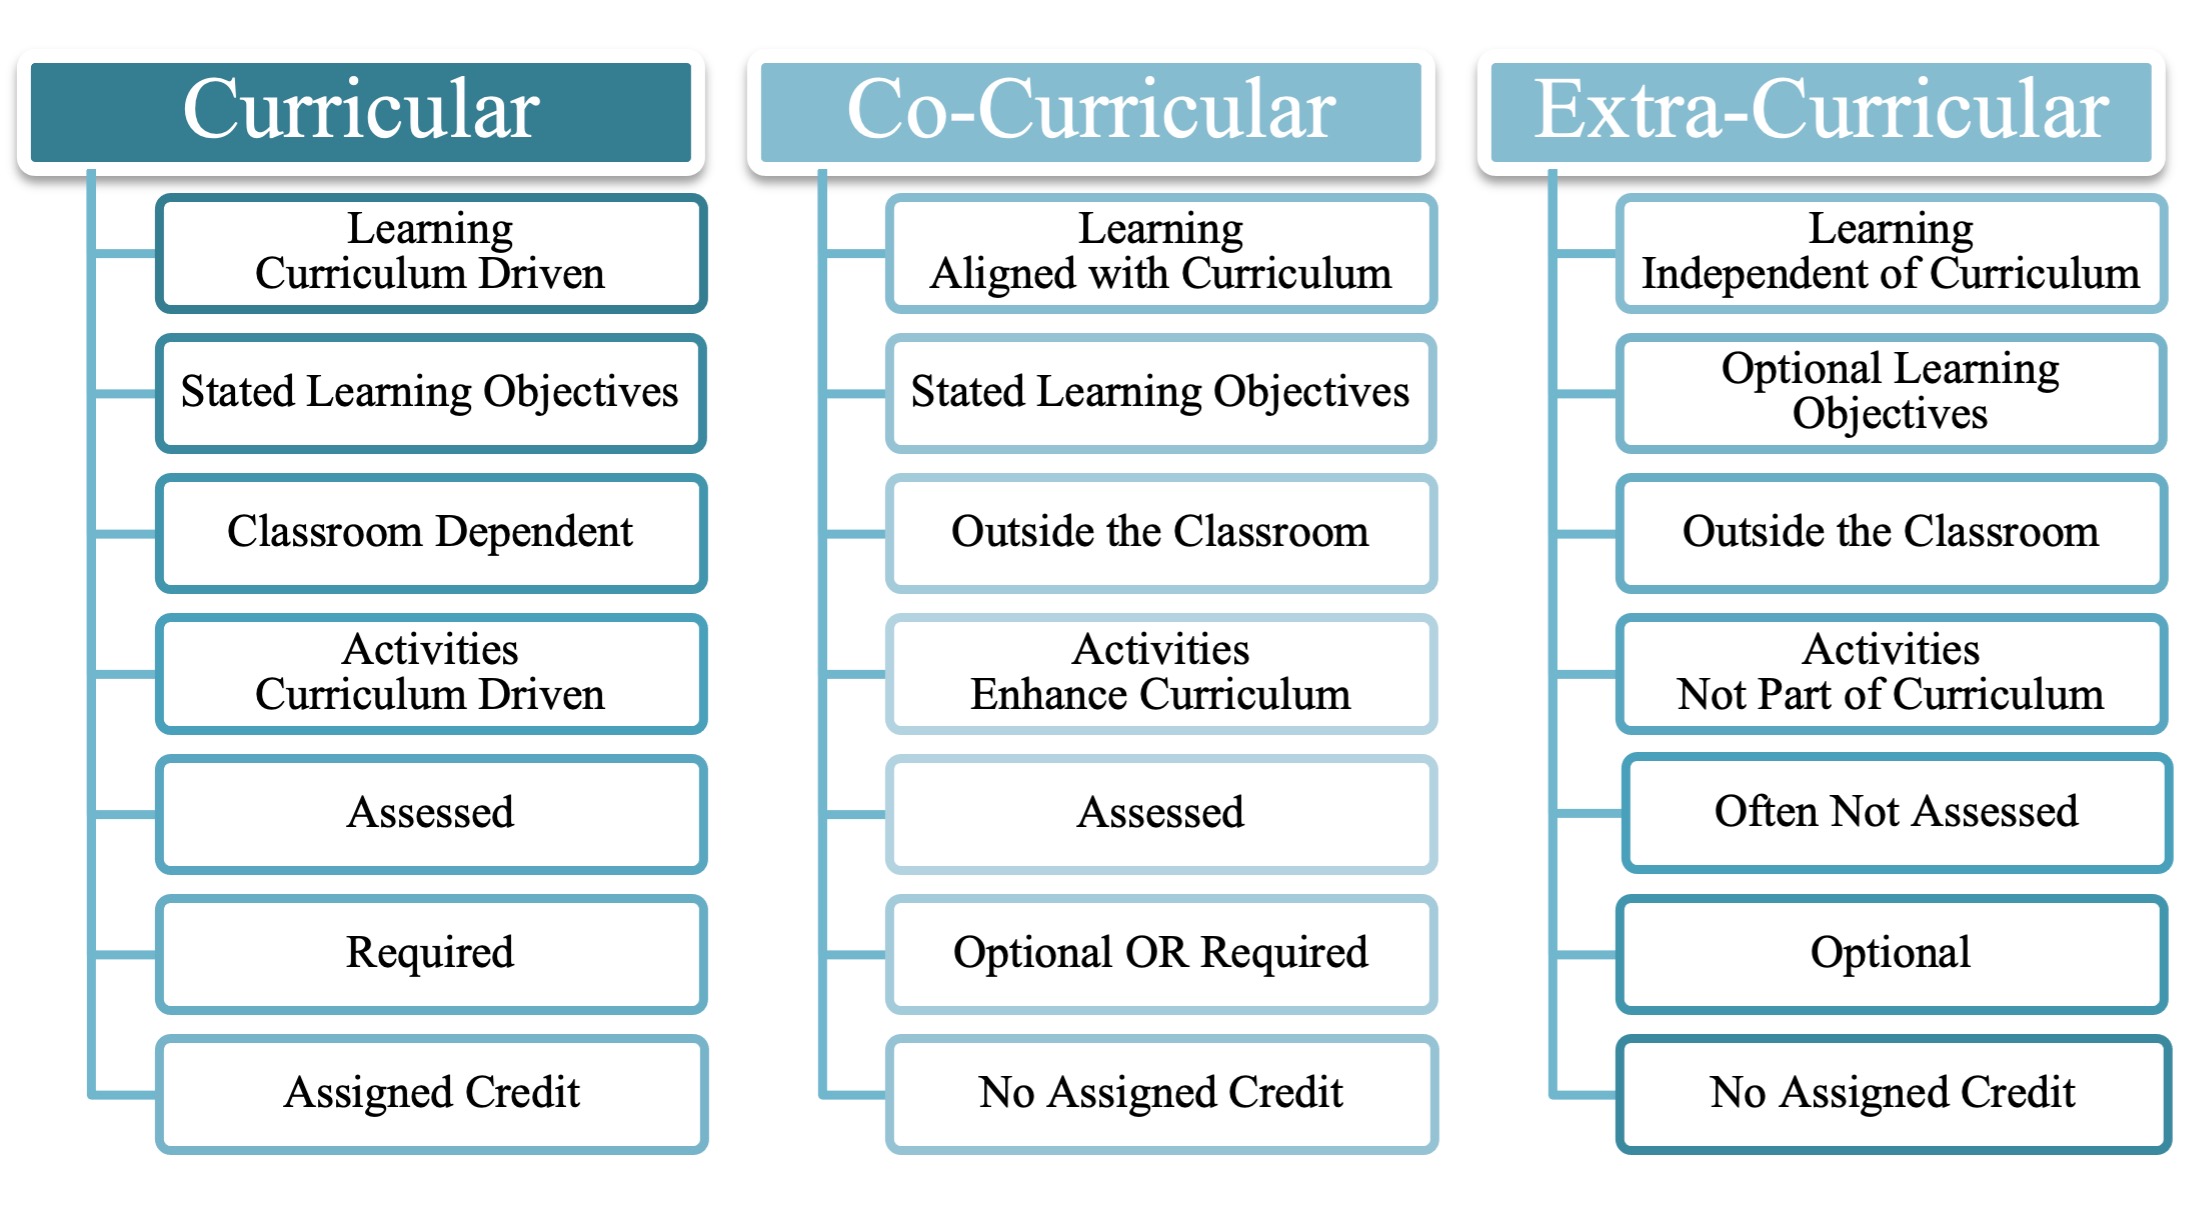 Comparison of learning modes. Curricular: Learning, Curriculum Driven, Stated Learning Objectives, Classroom Dependent, Activities Curriculum Driven, Assessed, Required, Assigned Credit. Co-Curricular: Learning Aligned with Curriculum, Stated Learning Objectives, Outside the Classroom, Activities Enhance Curriculum, Assessed, Optional OR Required, No Assigned Credit. Extra-Curricular: Learning Independent of Curriculum, Optional Learning Objectives, Outside the Classroom, Activities Not Part of Curriculum, Often Not Assessed, Optional, No Assigned Credit.